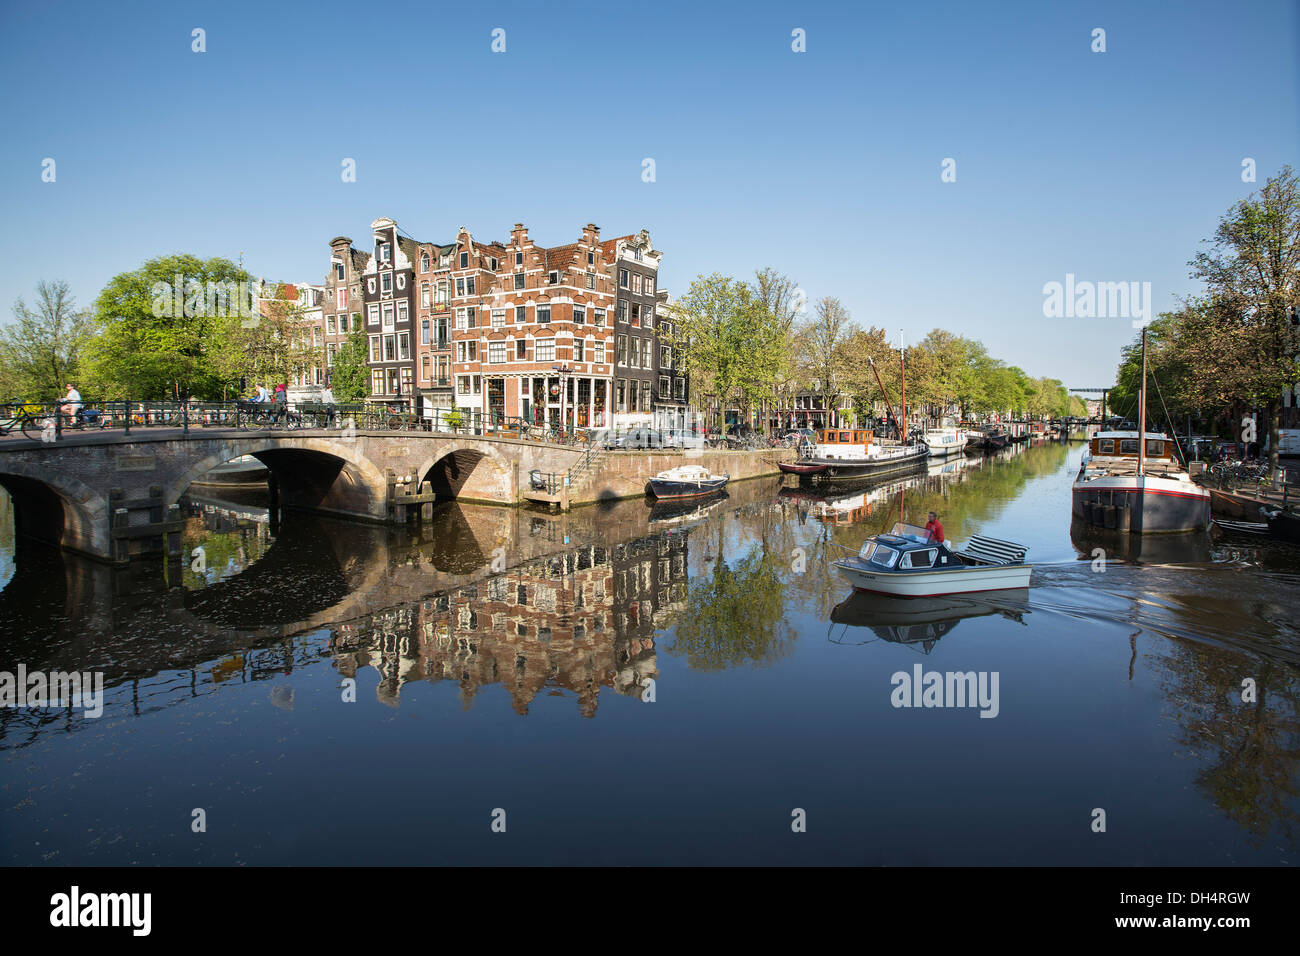 Netherlands, Amsterdam, 17th century houses, houseboats, small boat at canal called Brouwersgracht. Unesco World Heritage Site Stock Photo